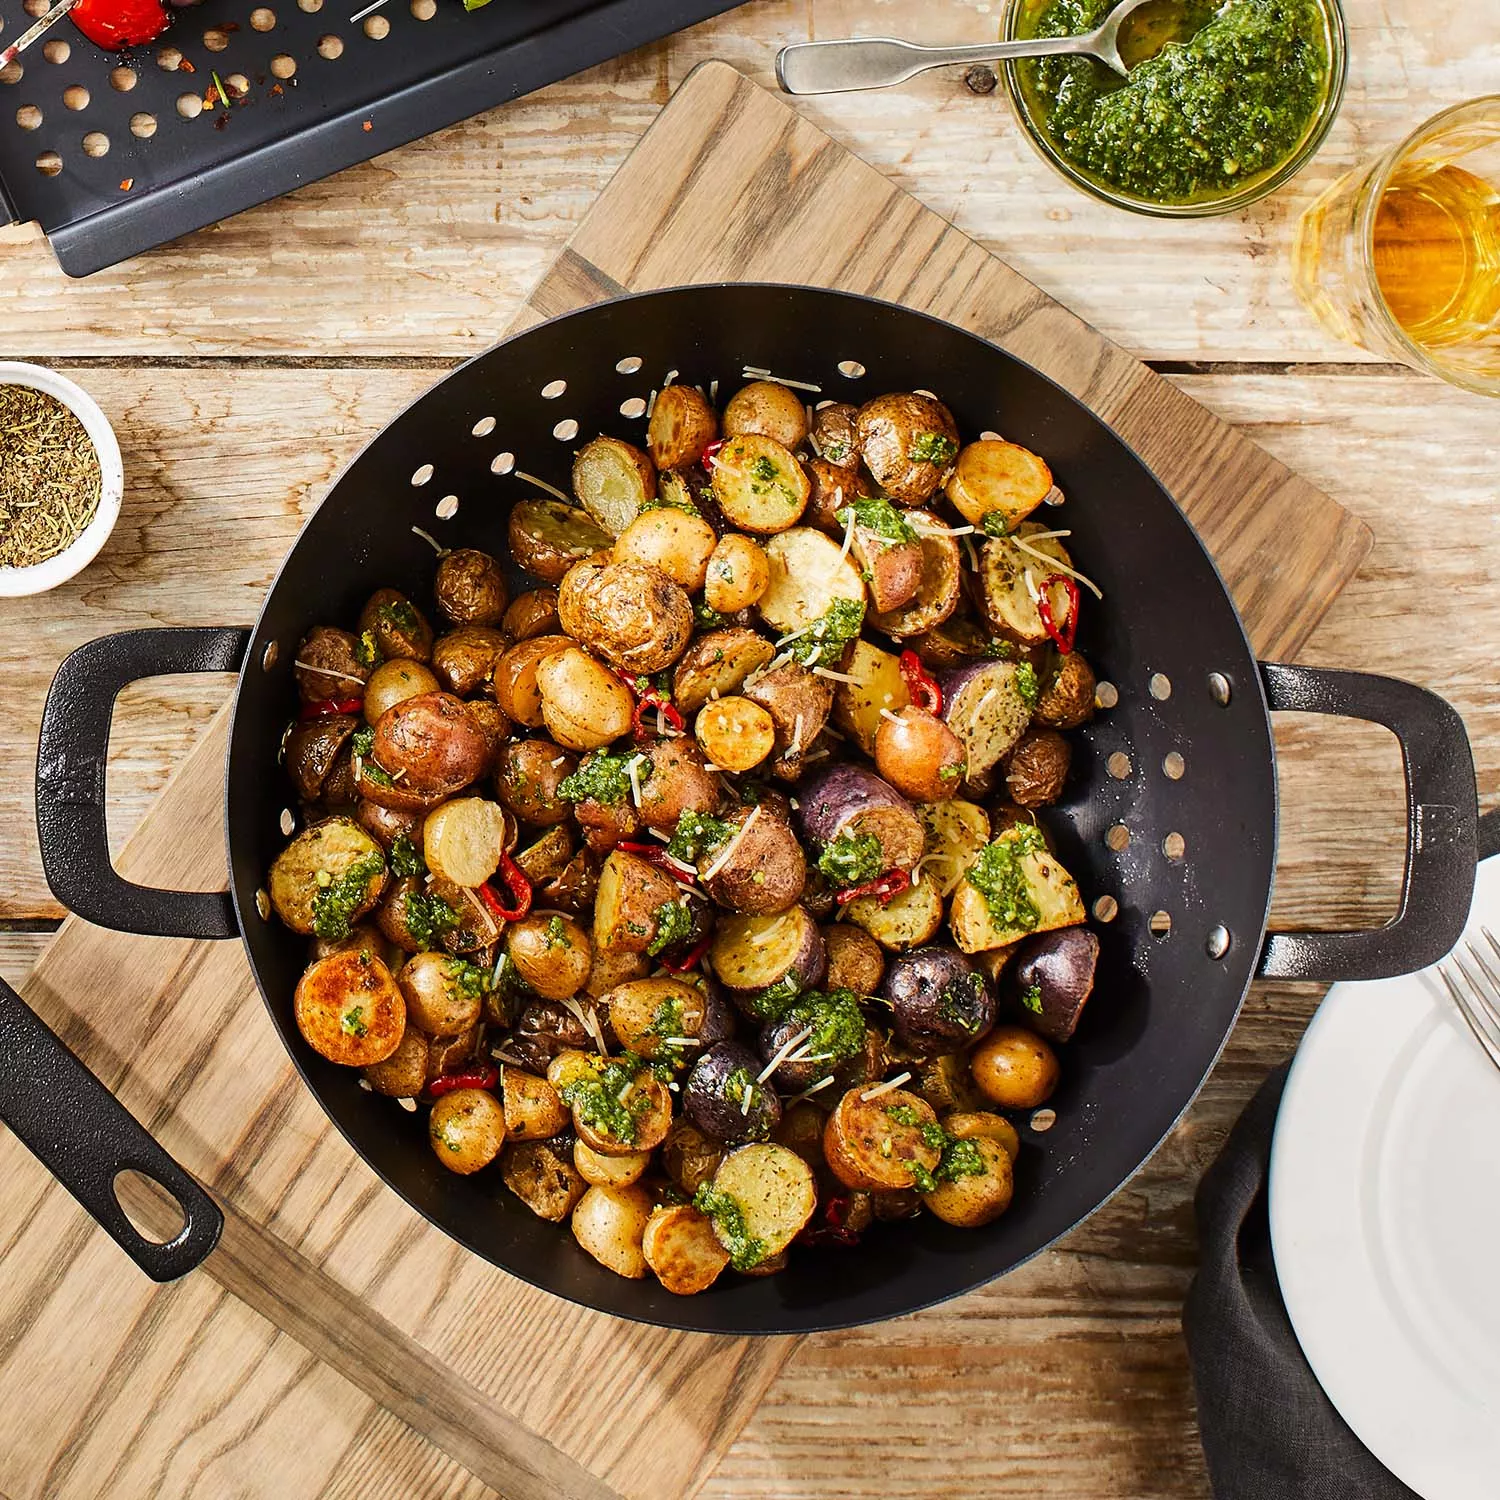 BK Grilling Carbon Steel Outdoor Cookware Collection, Pan, Roaster